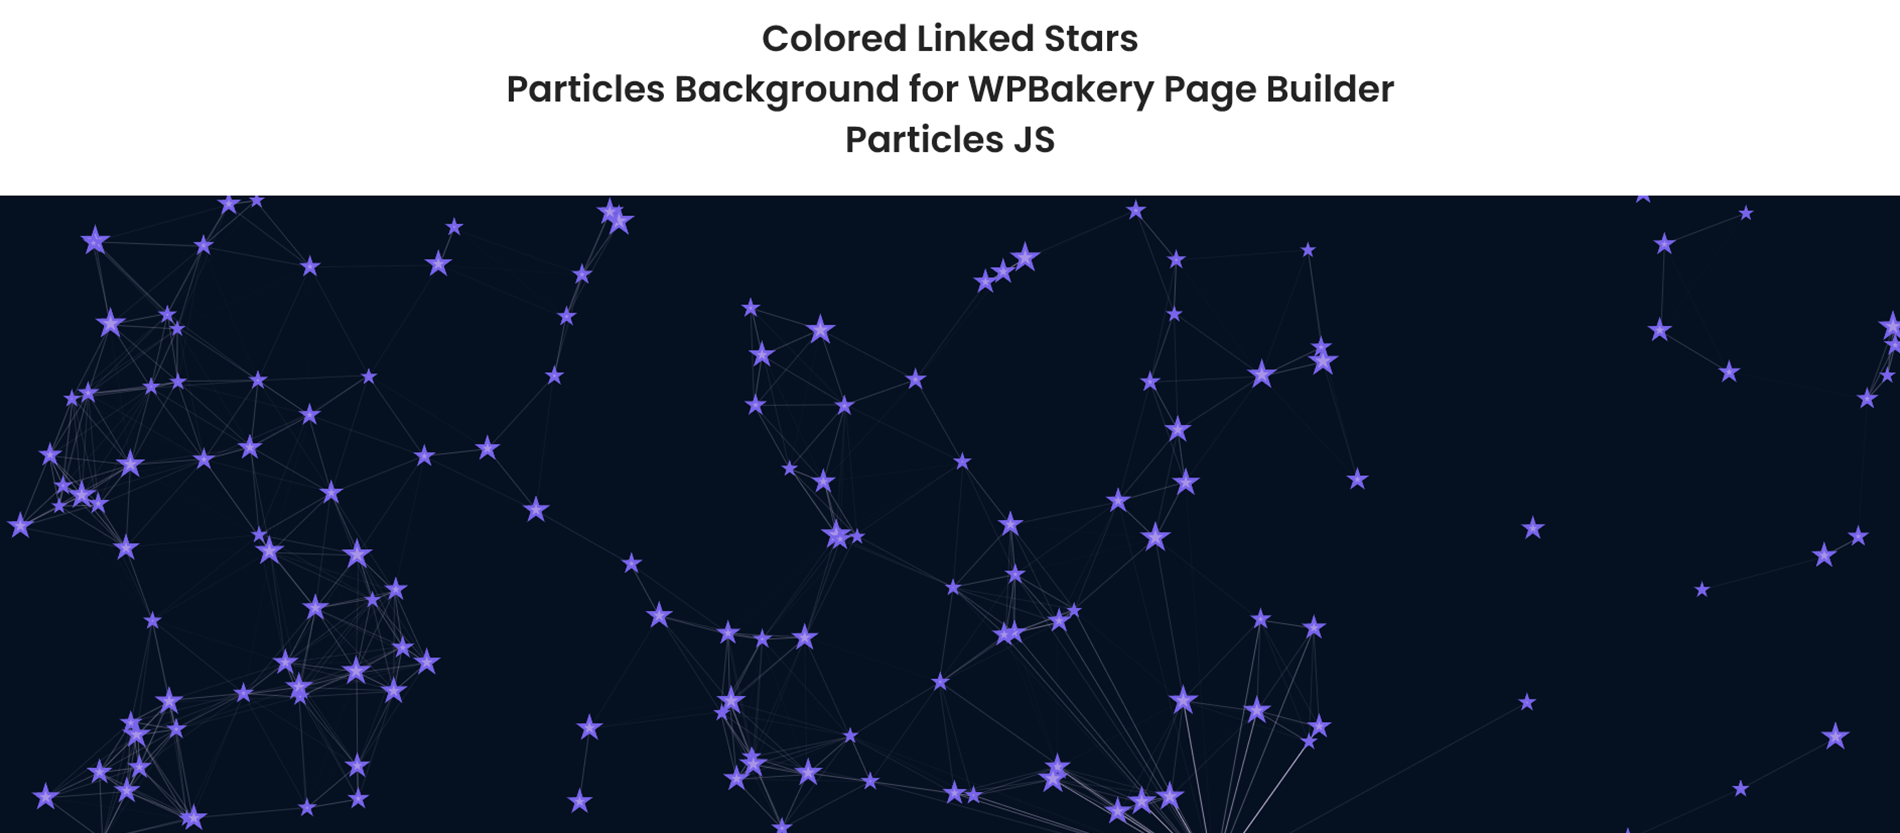 Colored-Linked-Stars